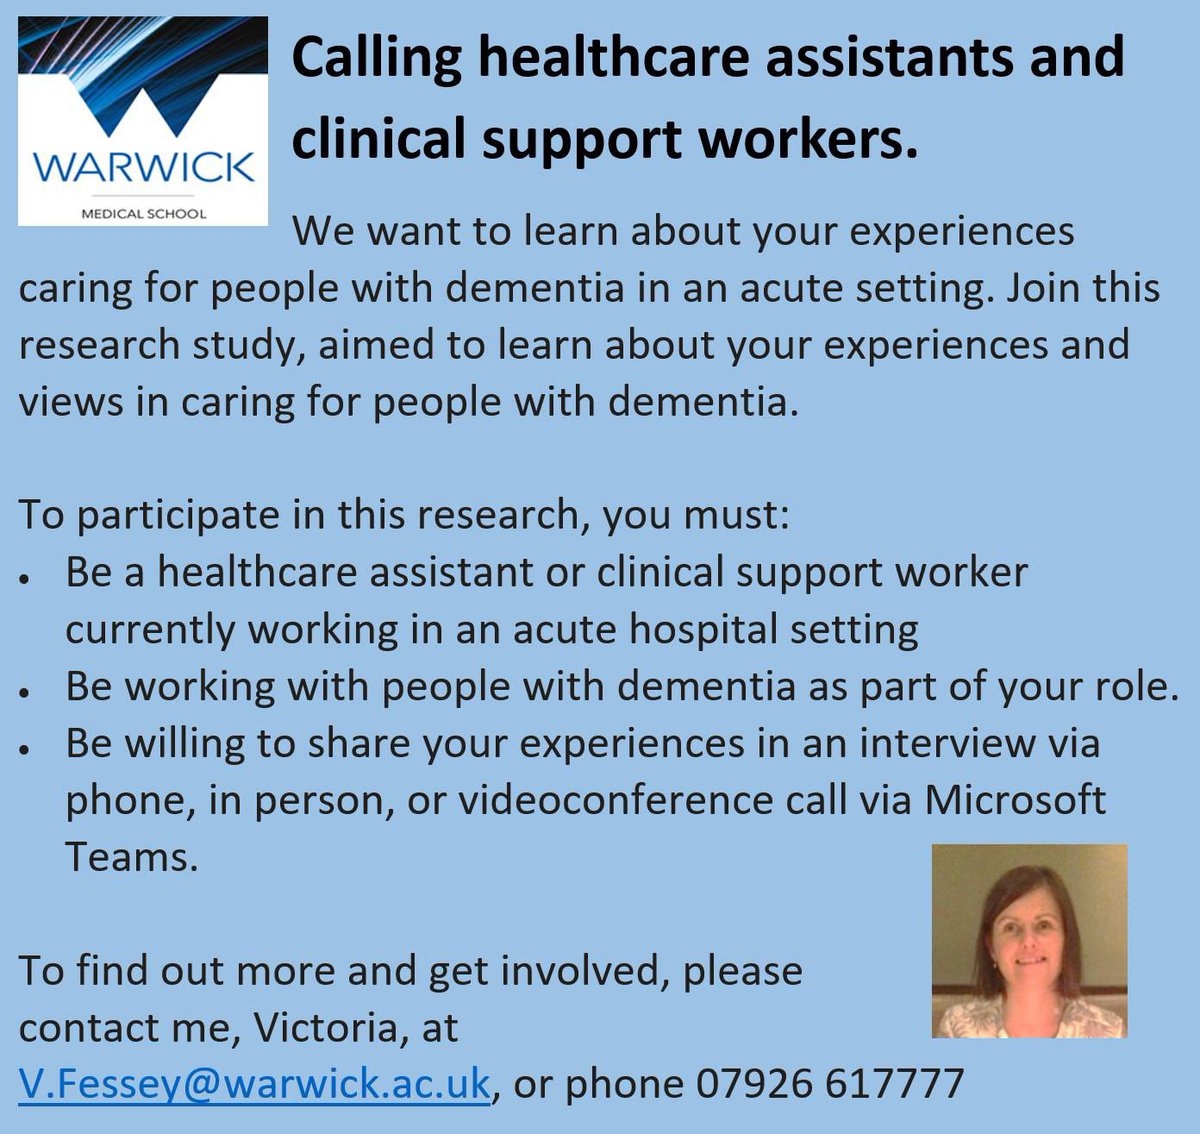 @QI_Dementia @GEH_HCA @eacpuhcw @NursesAdmiral Still recruiting for this important study👇Please share widely, especially if you know someone who may be interested in taking part. Contact details in image or direct message me for more information. Thank you! 😊